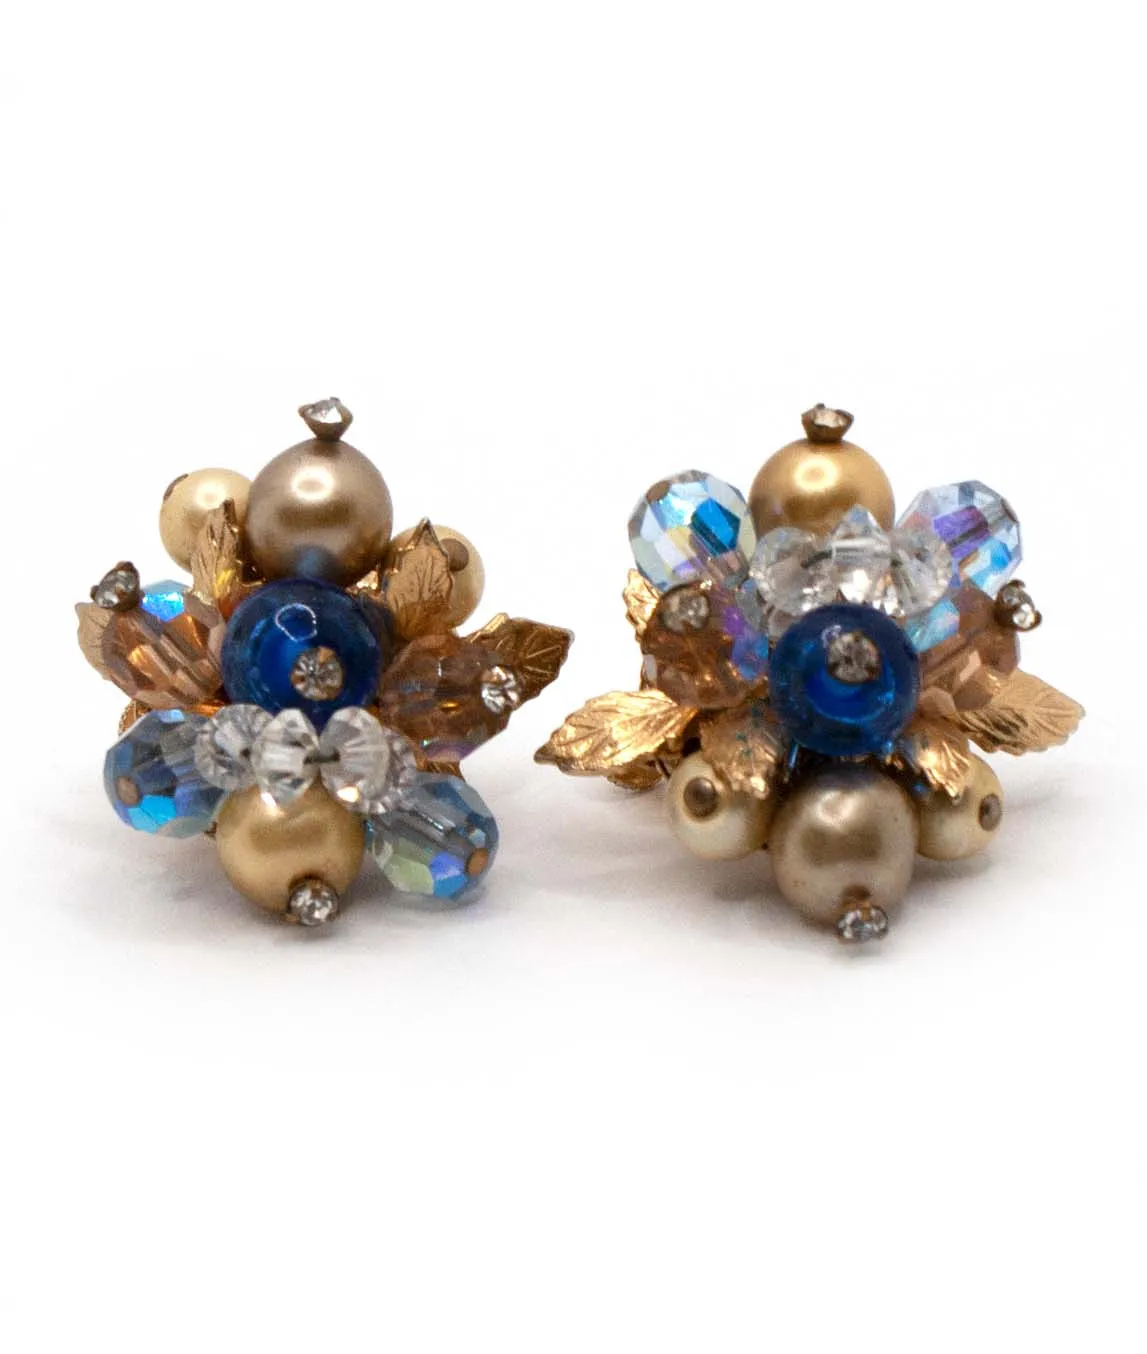 Vintage Vendôme earrings constructed from gold painted and blue faceted beads with gold plated leaves